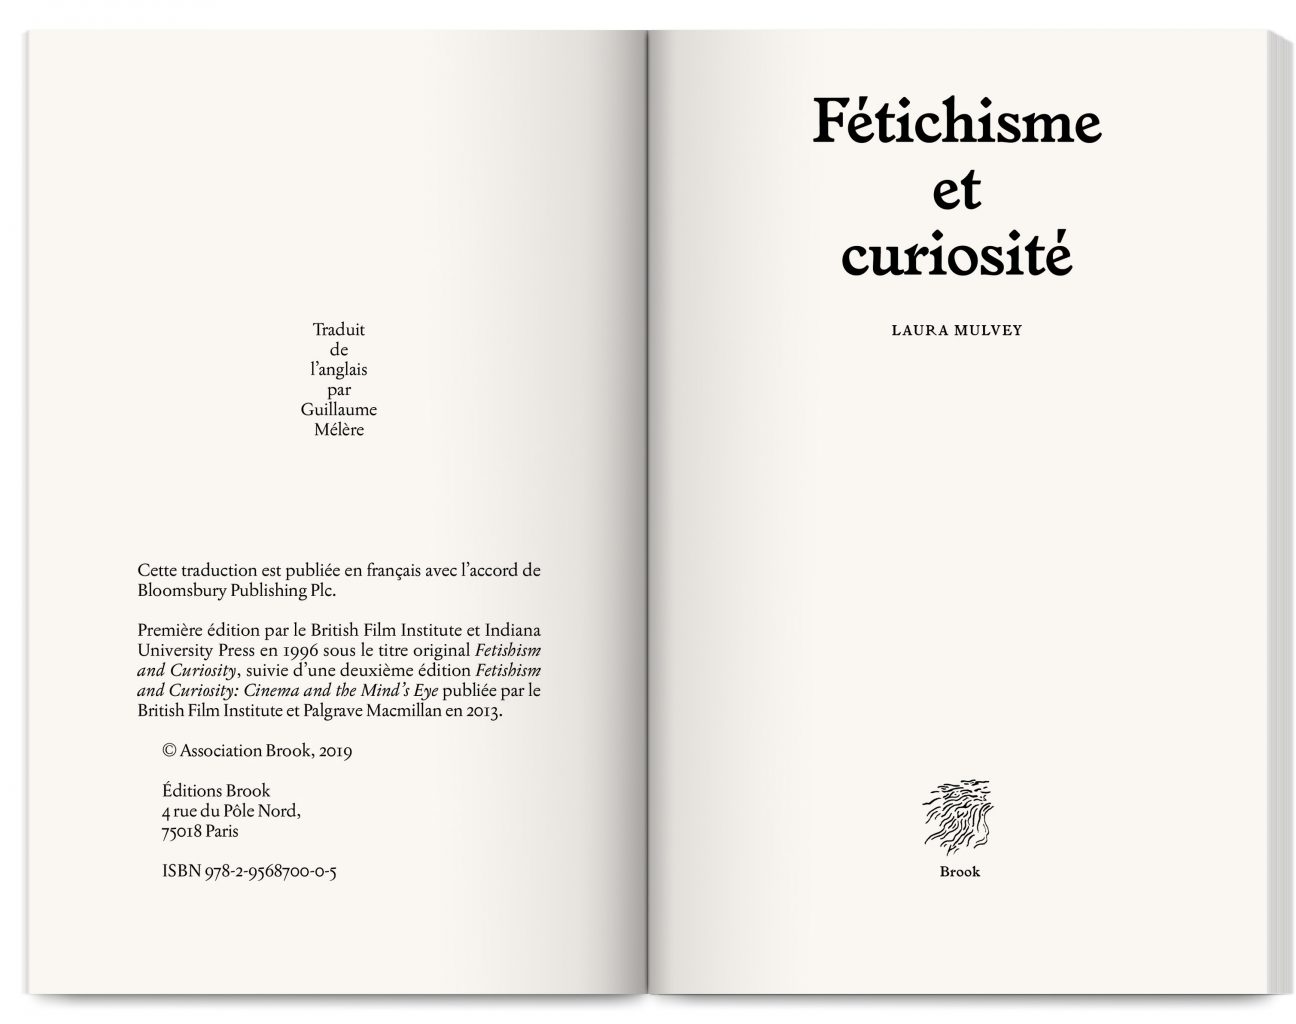 Pocket book Fétichisme et curiosité written by Laura Mulvey published by Éditions Brook, designed by In the shade of a tree studio, founded by Sophie Demay and Maël Fournier Comte.